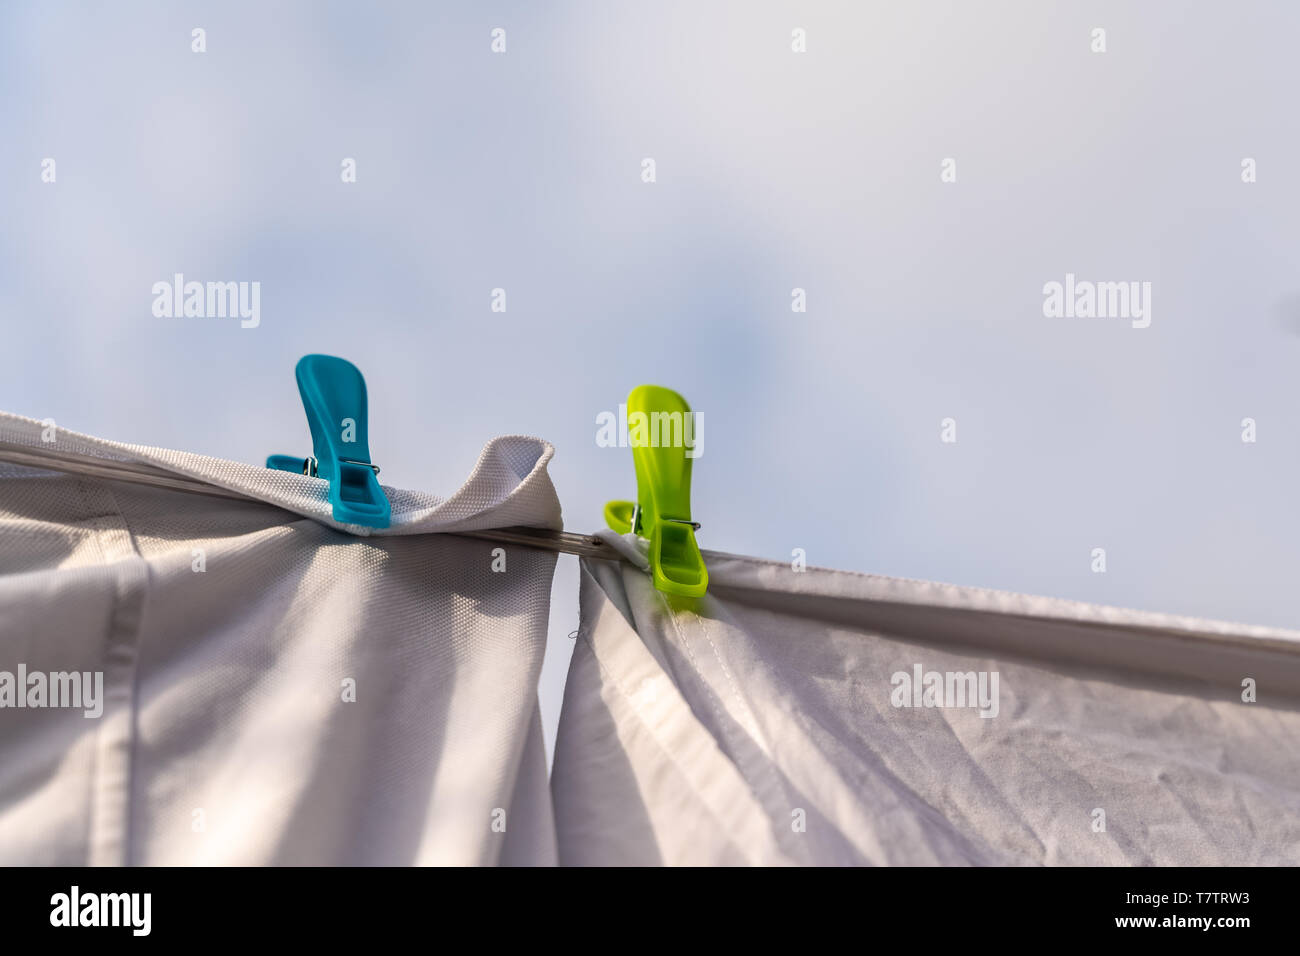 White clothes hung out to dry on a washing line and fastened by the clothes pegs against the blue sky in the bright warm sunny day Stock Photo